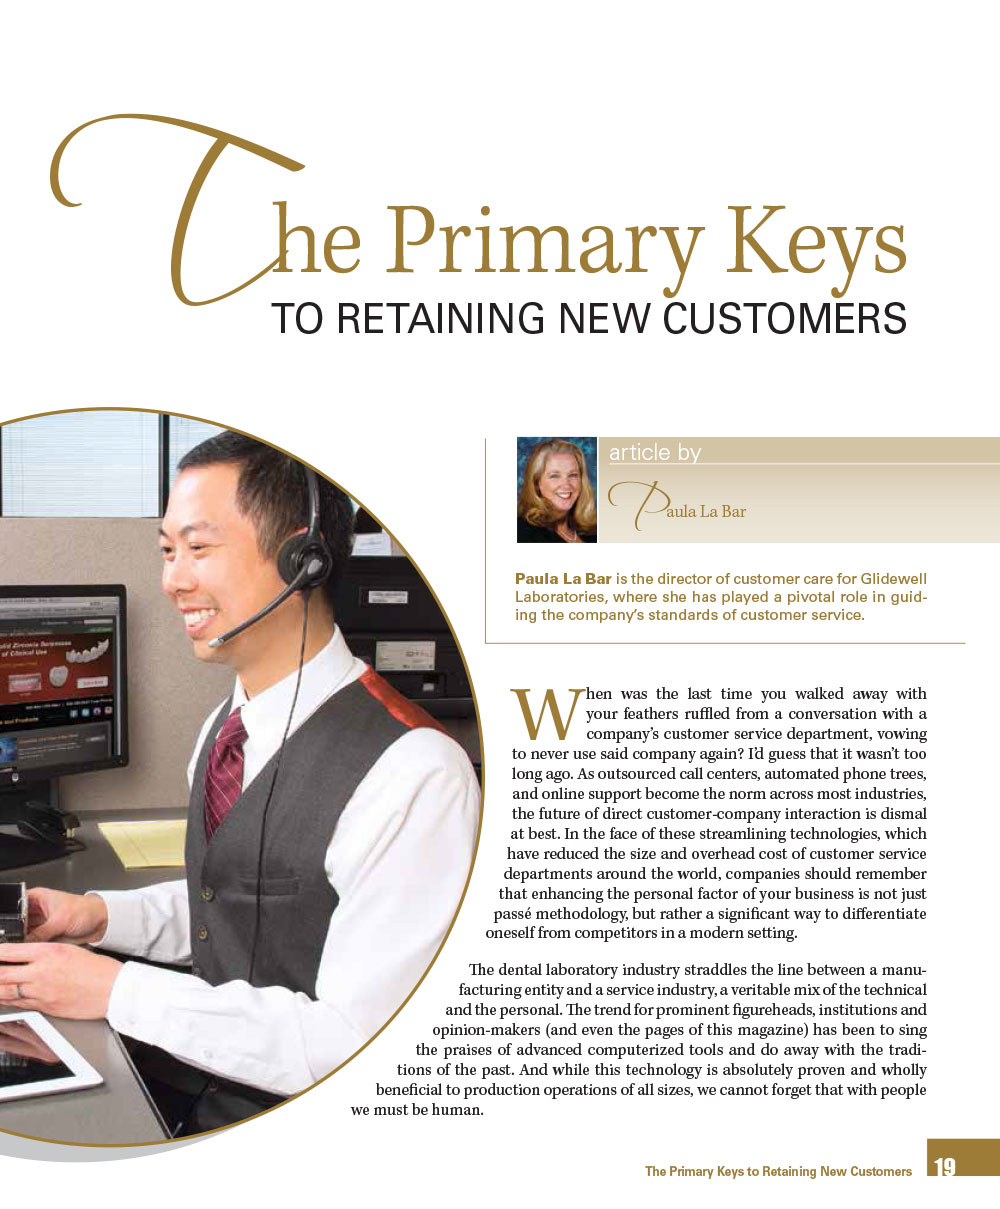 The Primary Keys to Retaining New Customers